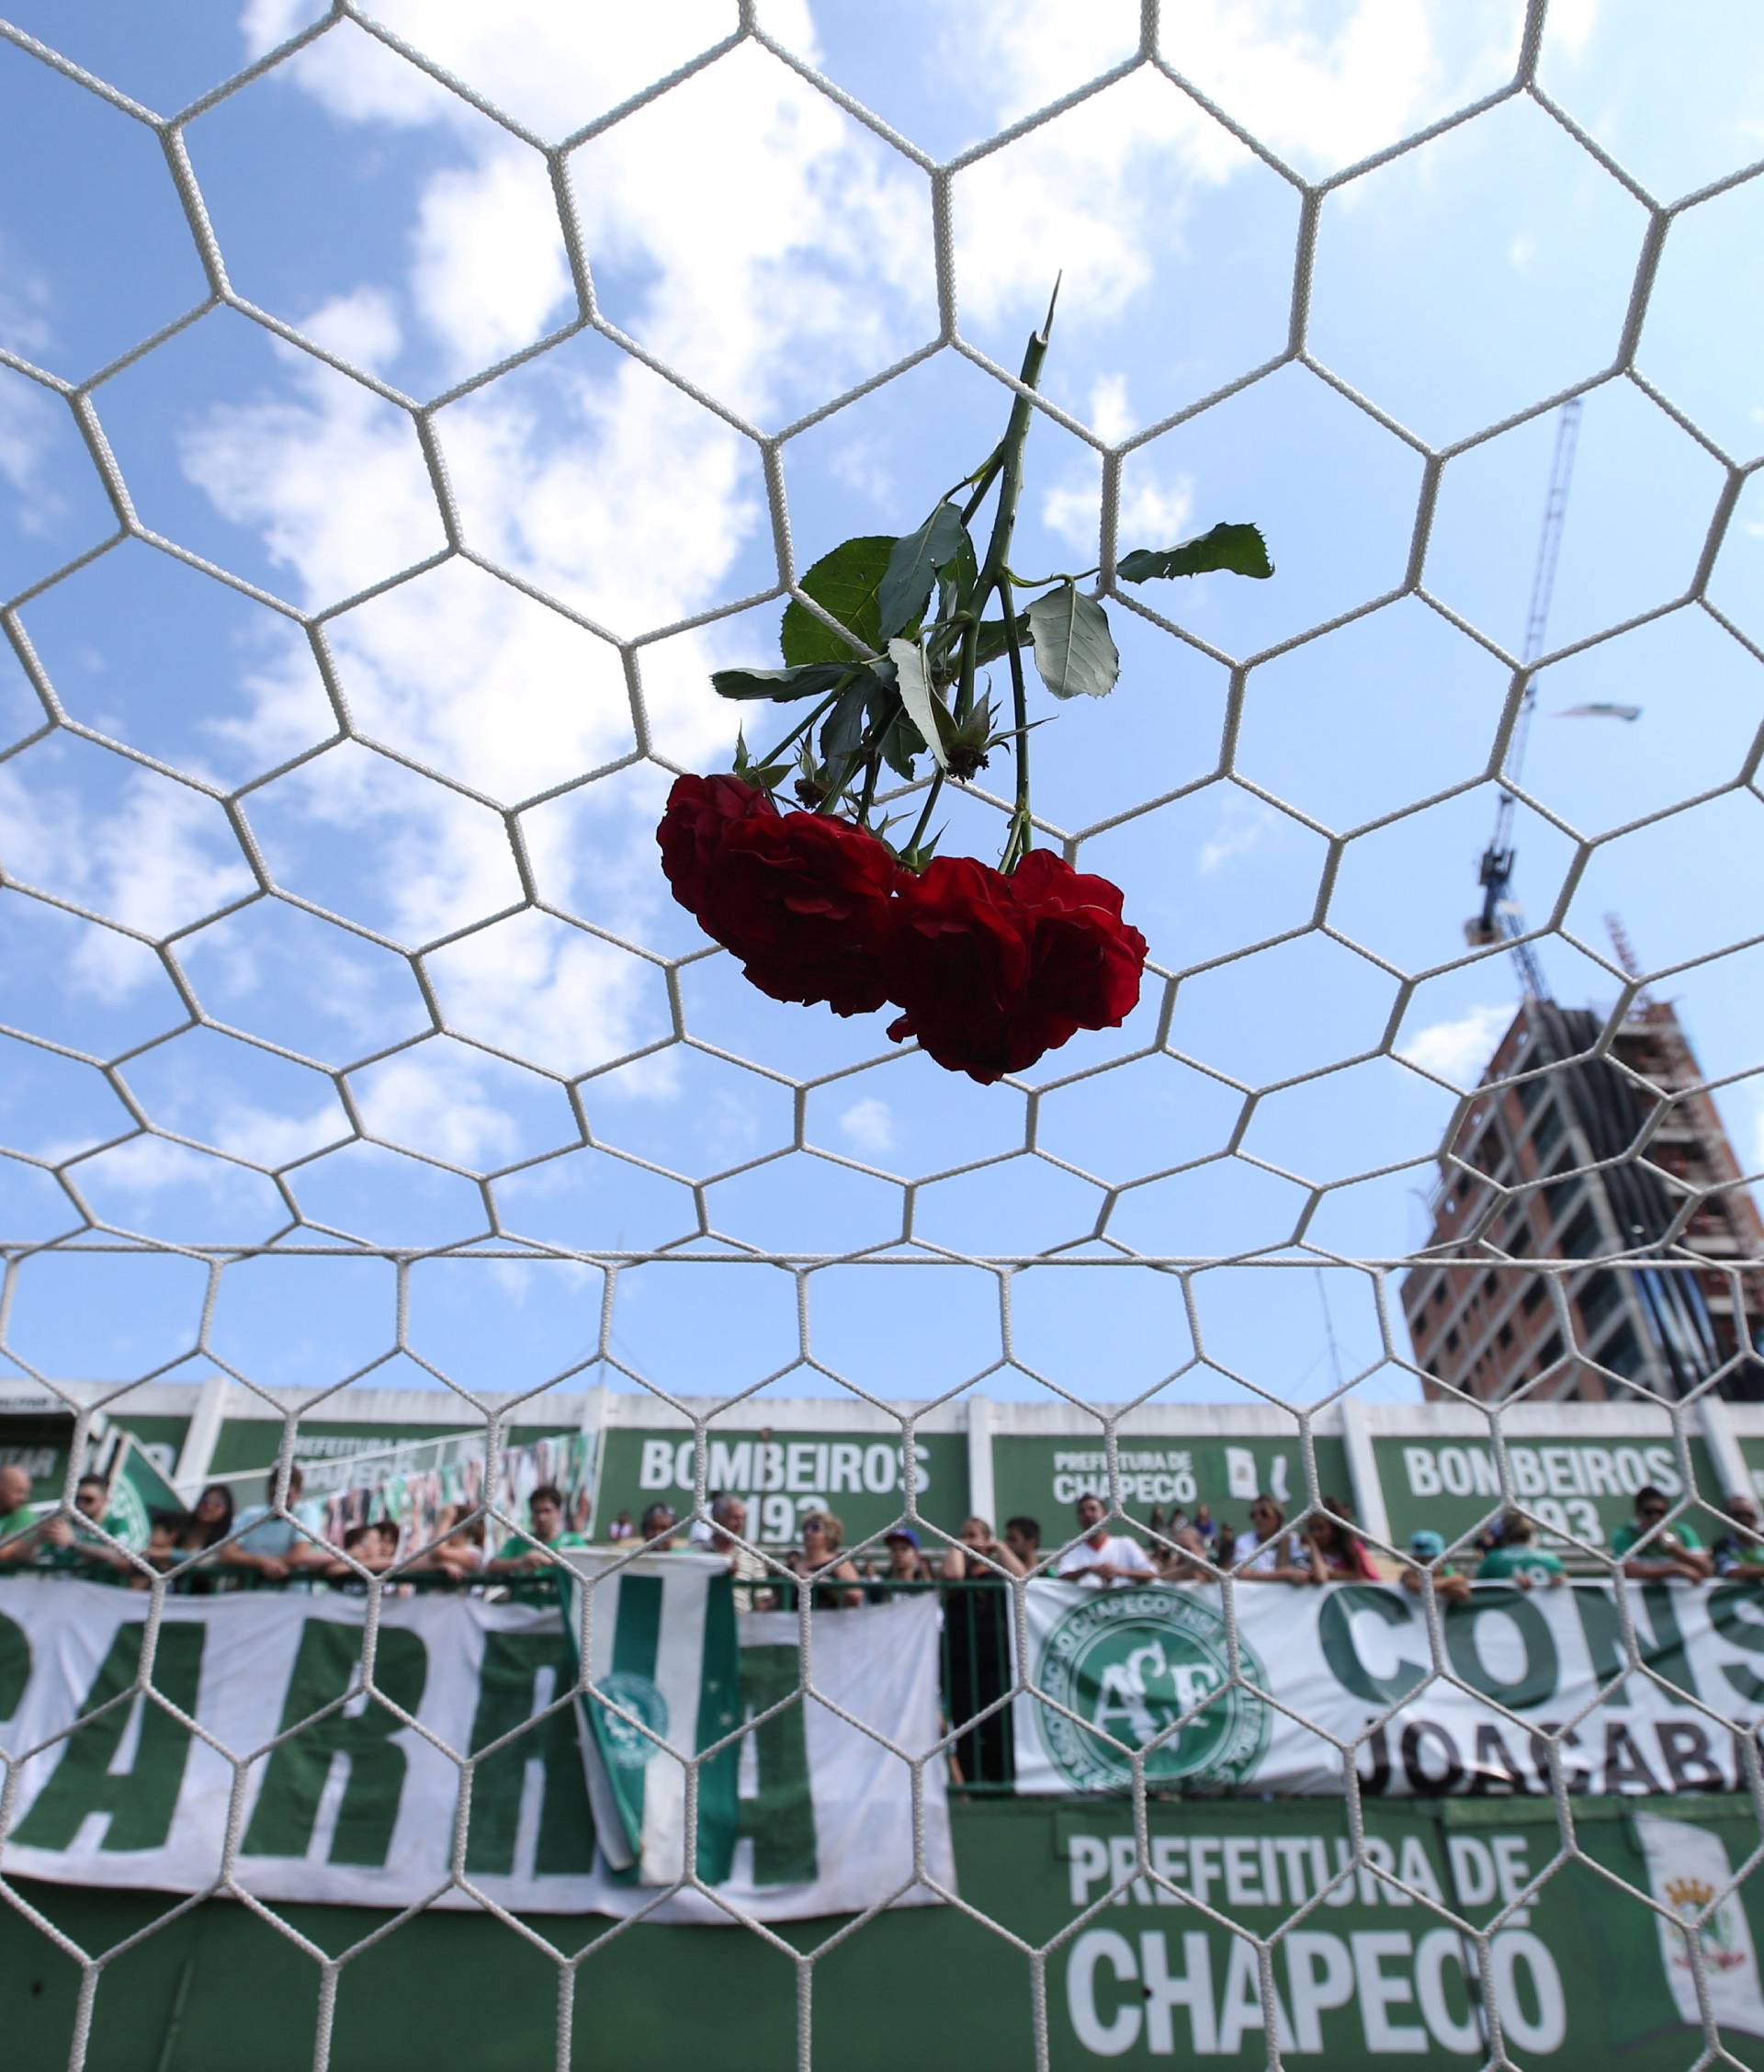 A flower is pictured in a net of the Arena Conda stadium in tribute to the players of Chapecoense soccer team in Chapeco